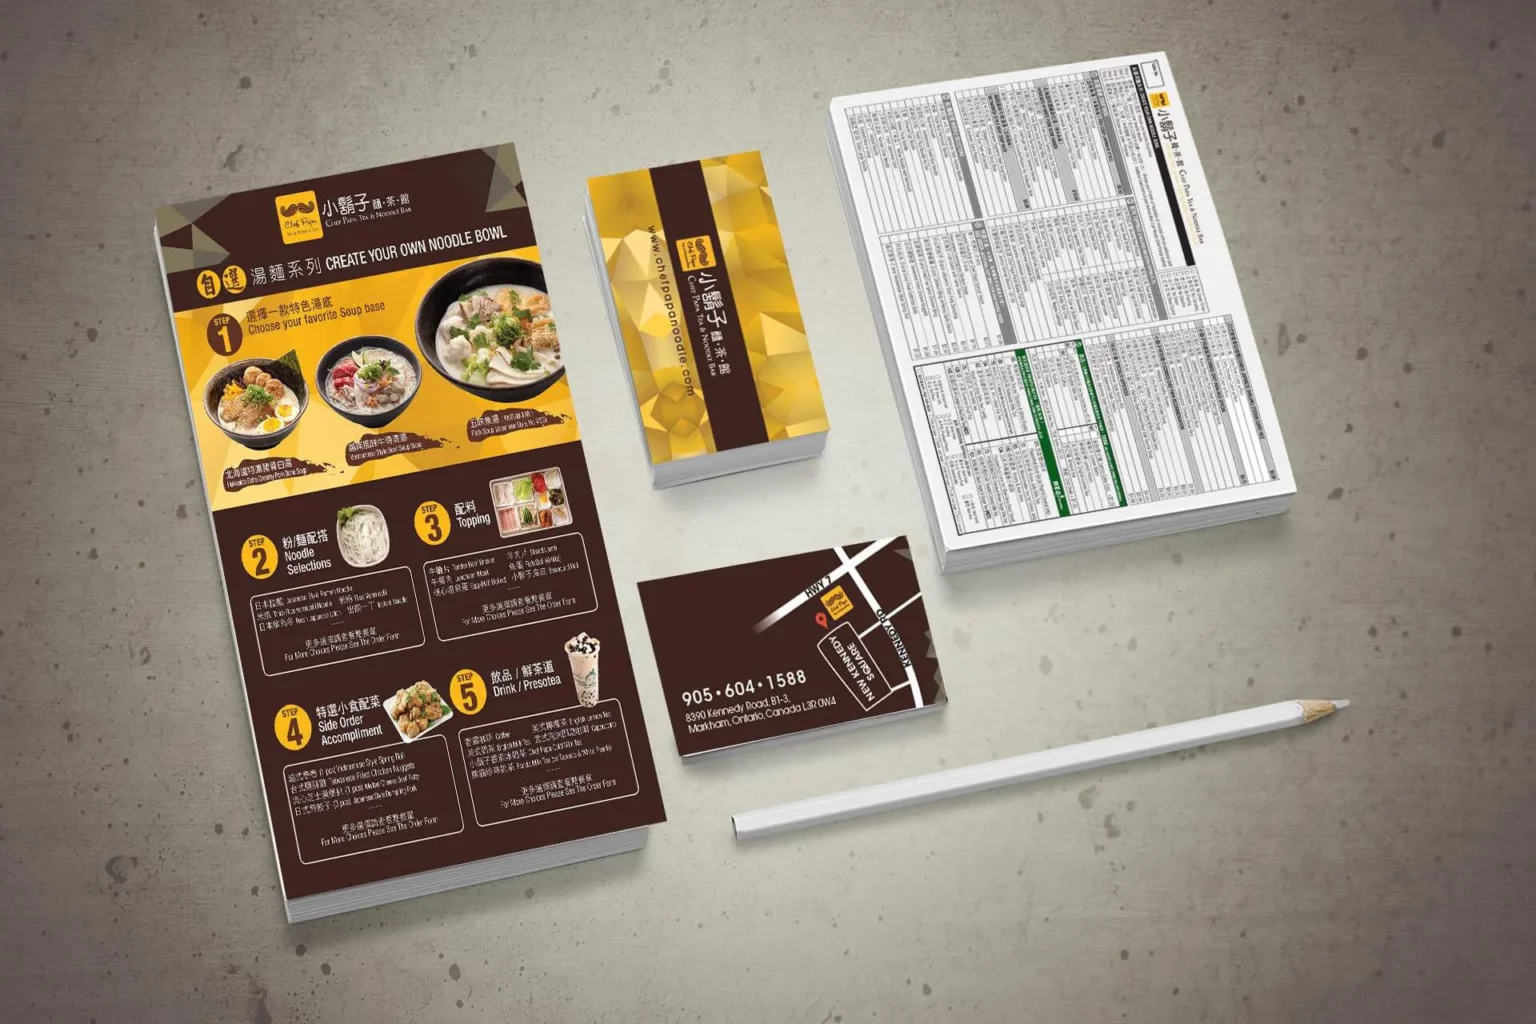 Graphic design project for Chef Pap 小鬍子麵茶館. Designed stationeries with brand logo and color scheme